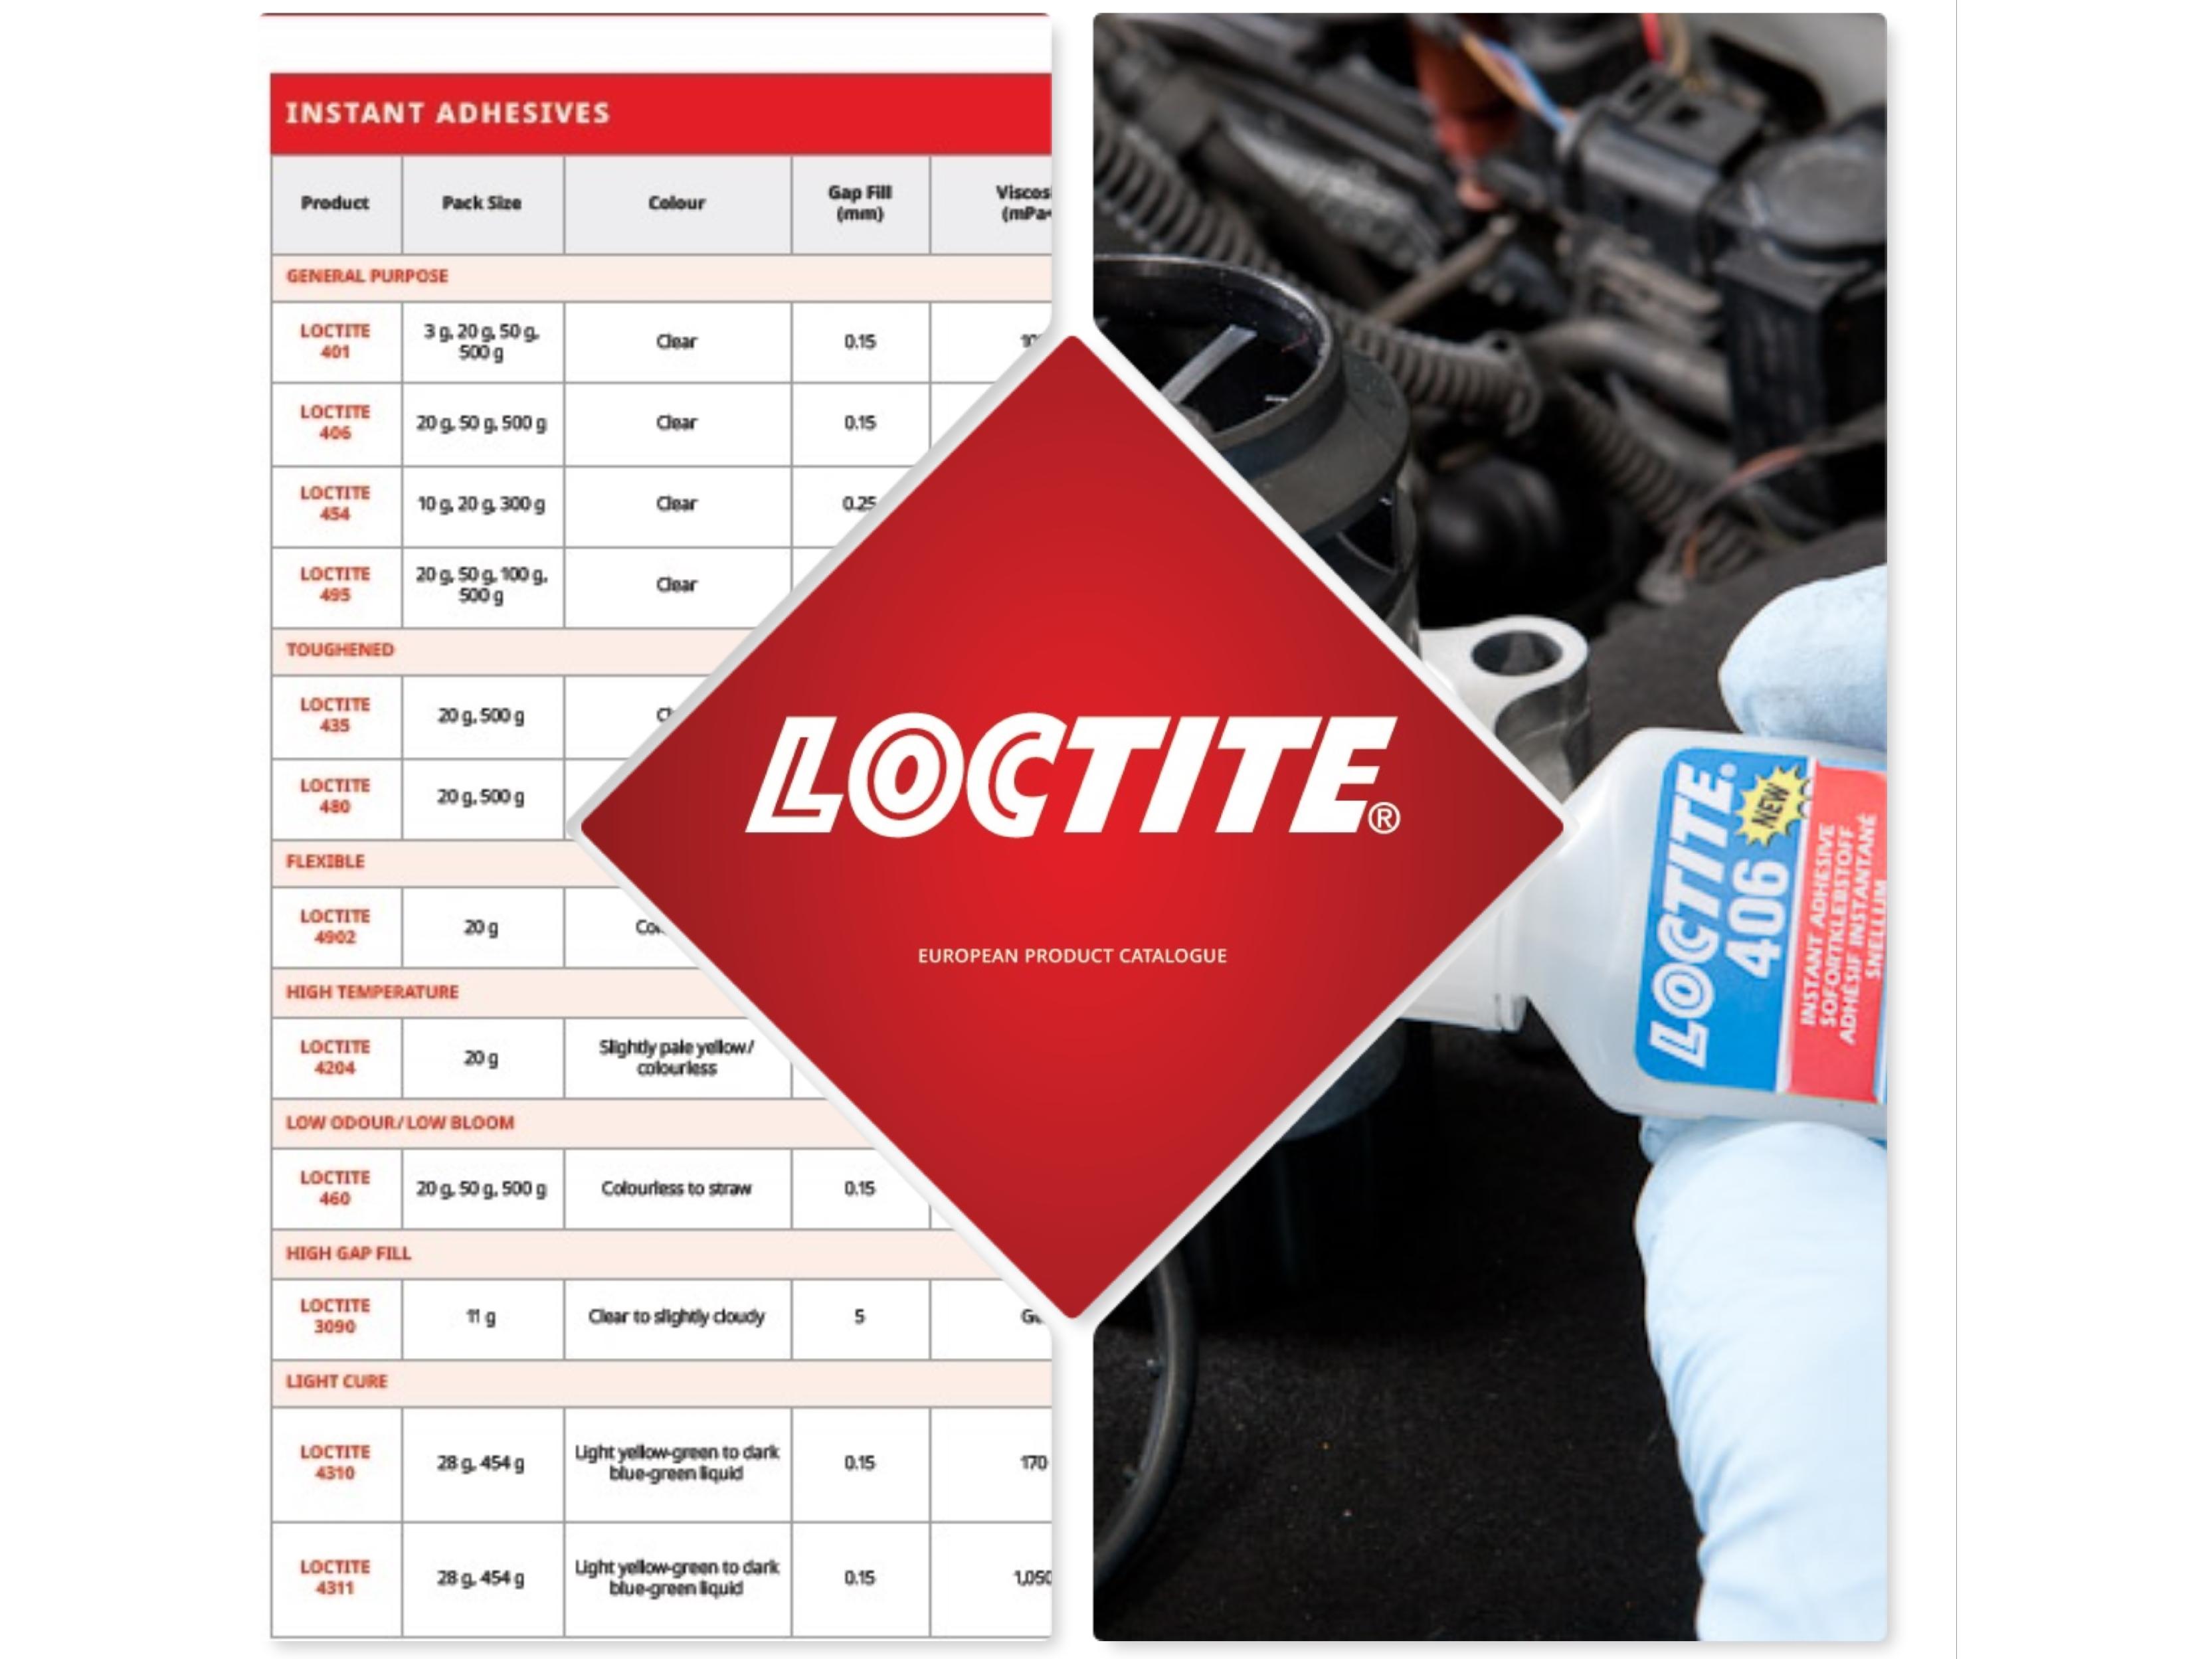 New guide to core LOCTITE product range launched